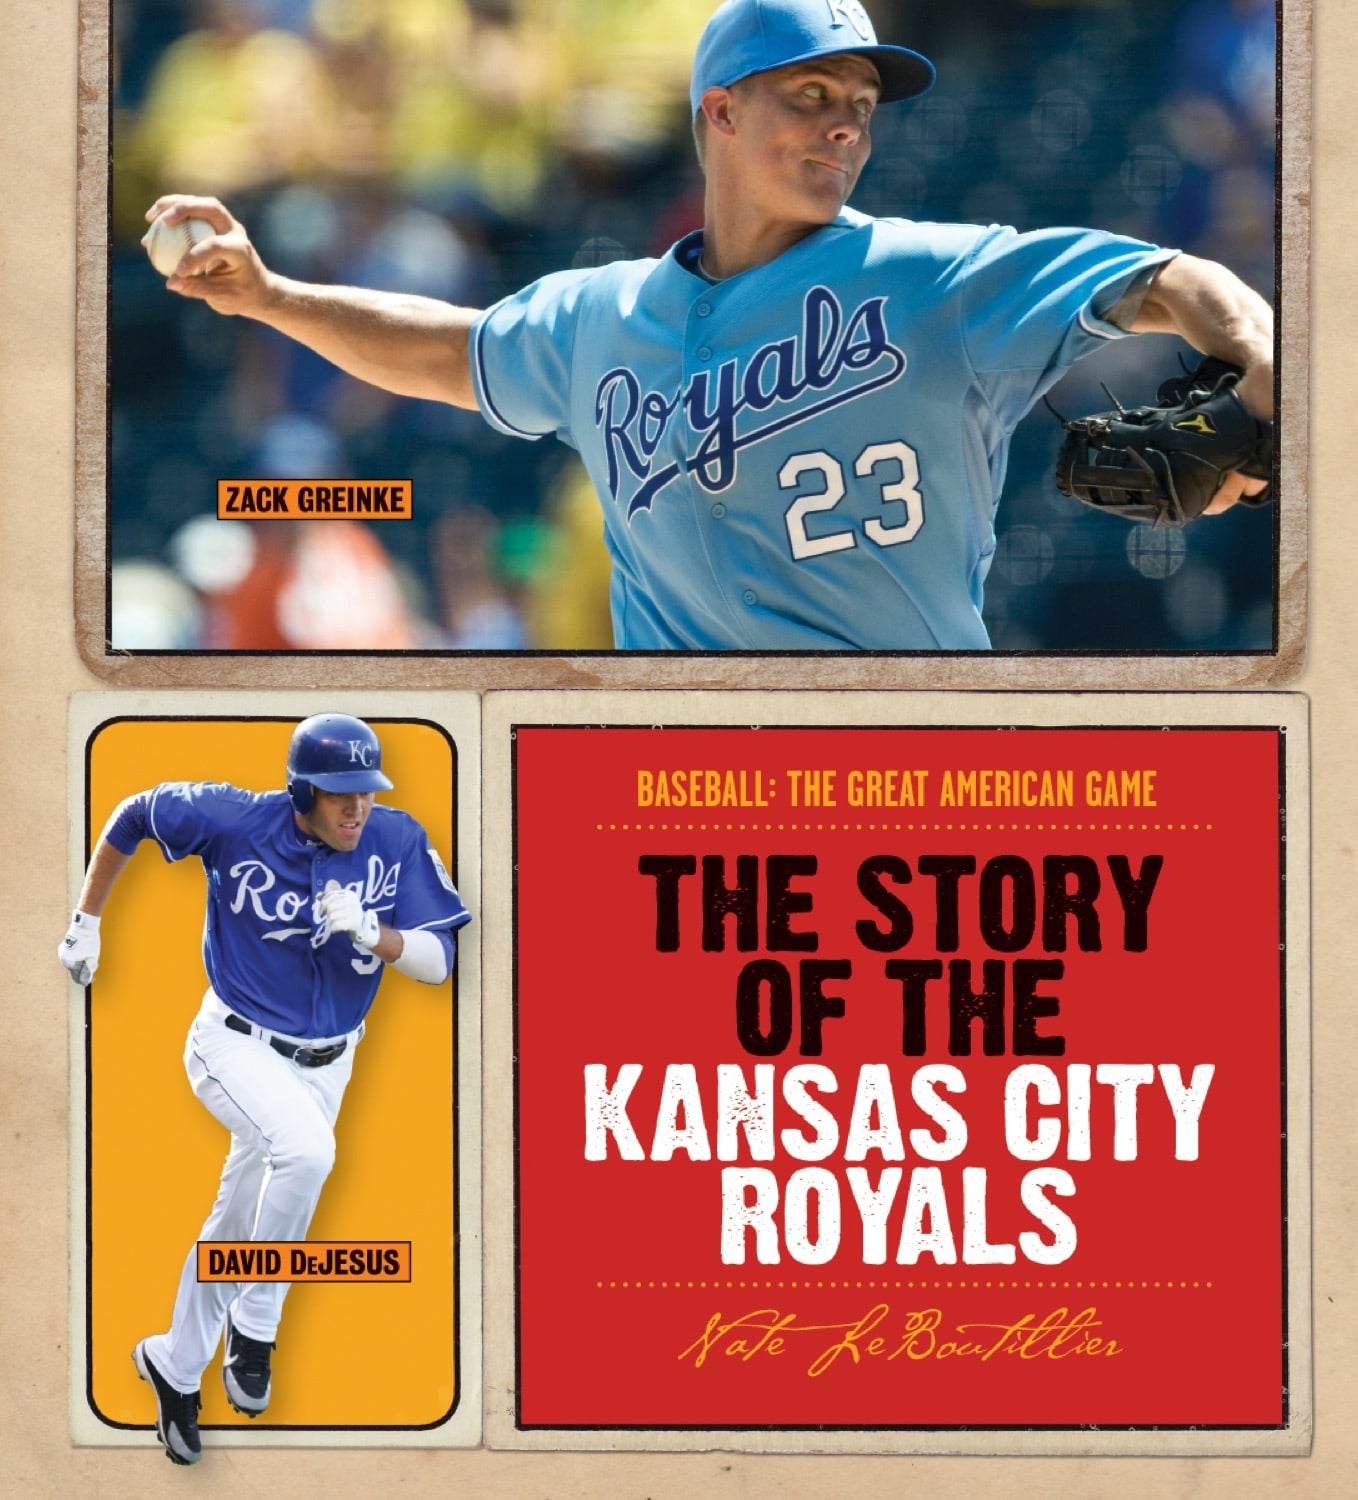 Baseball: The Great American Game: The Story of Kansas City Royals